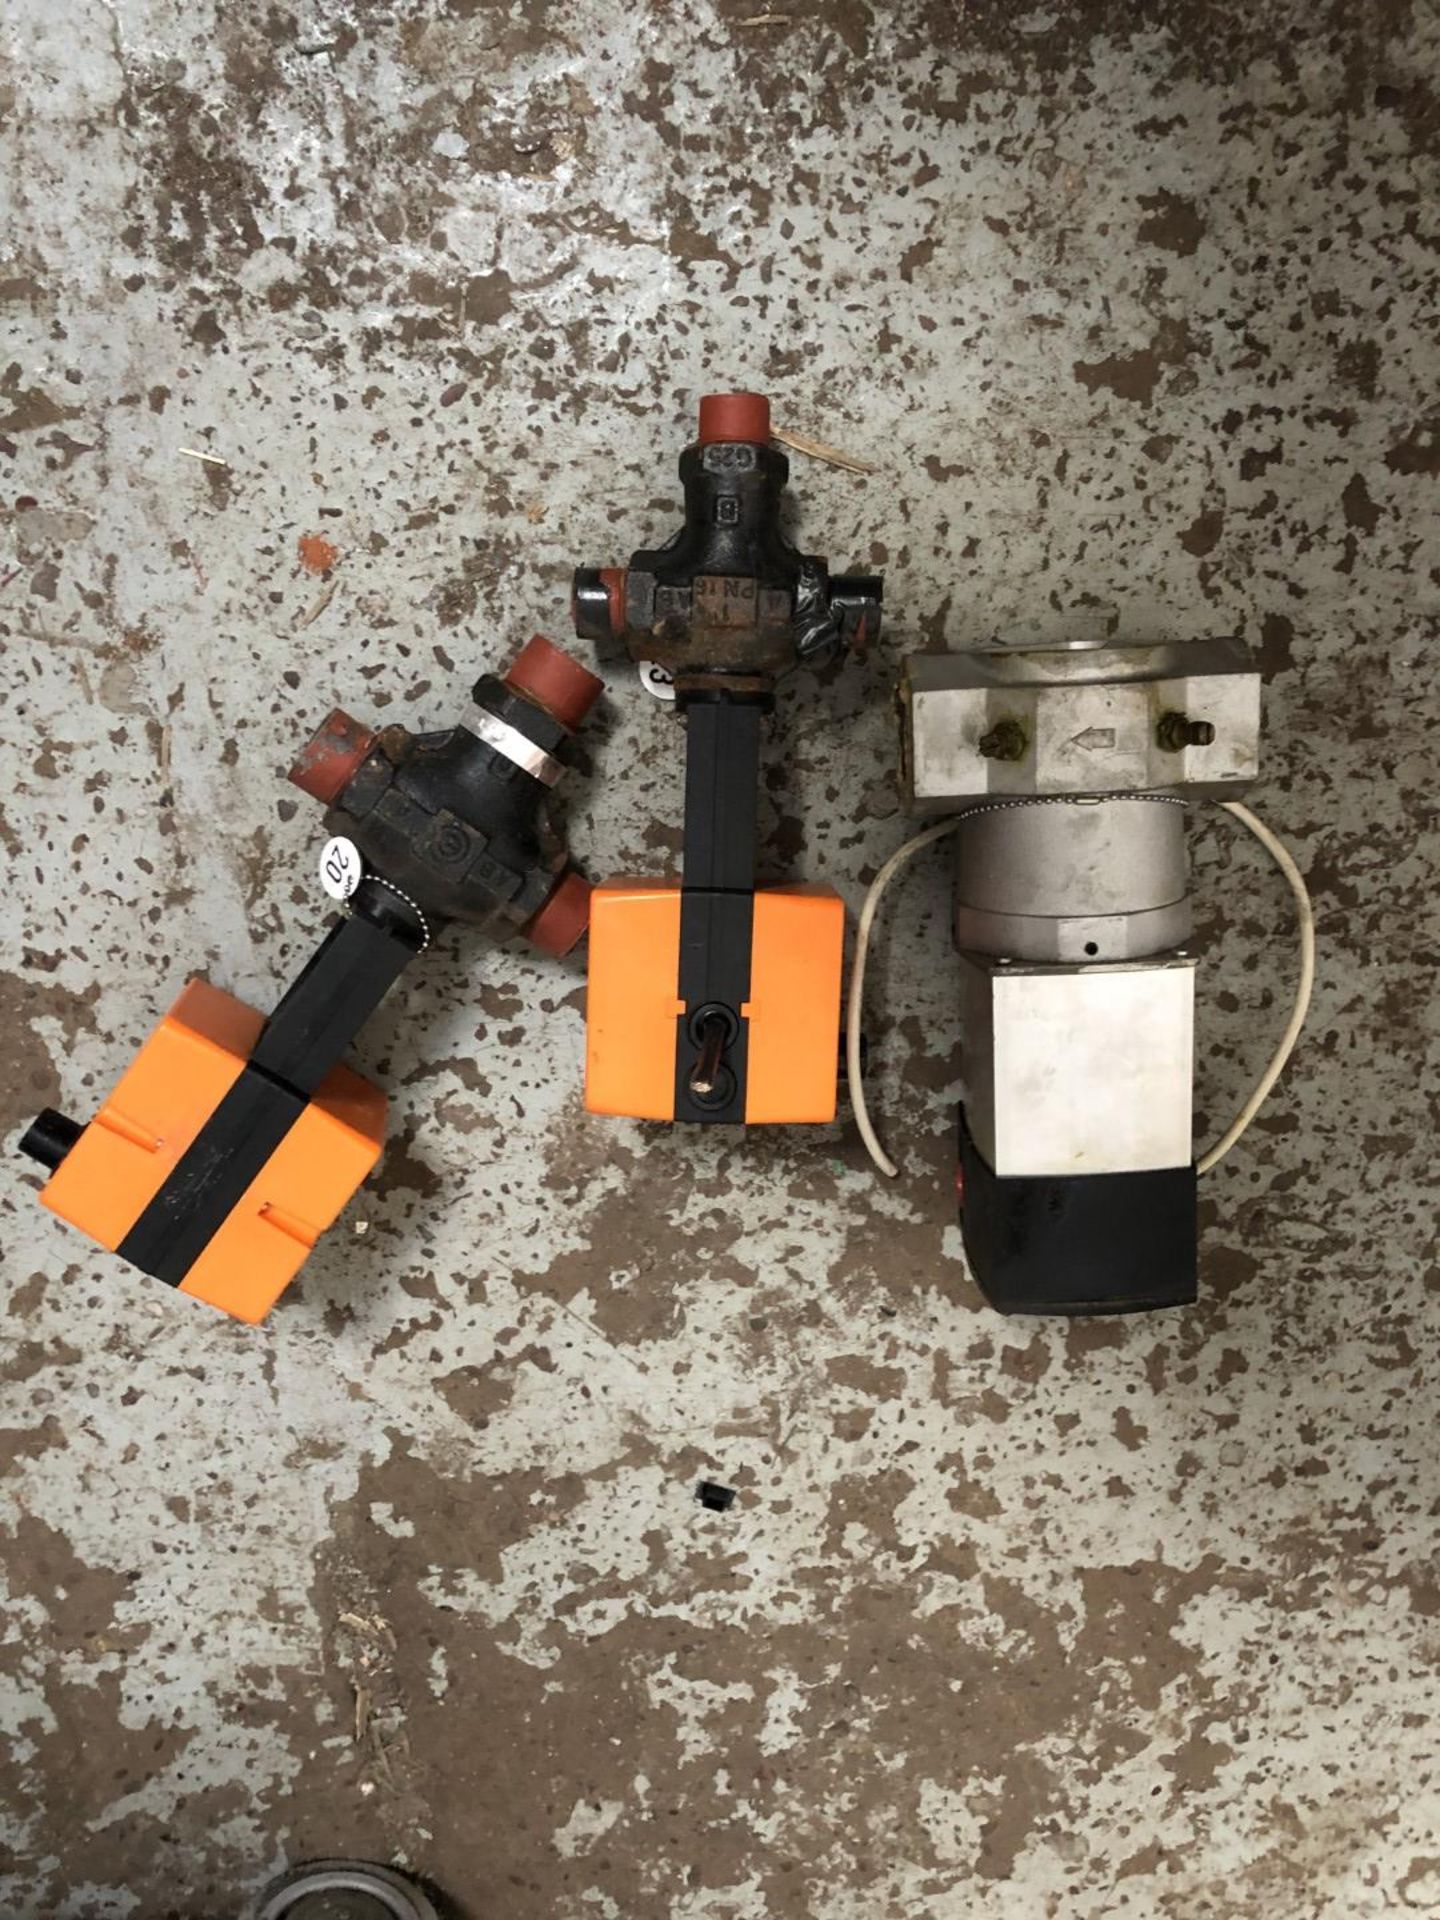 Lot Of Shut Off Valve And 2 x TREND Actuator - CL344 - NP004 - Location: Altrincham WA14